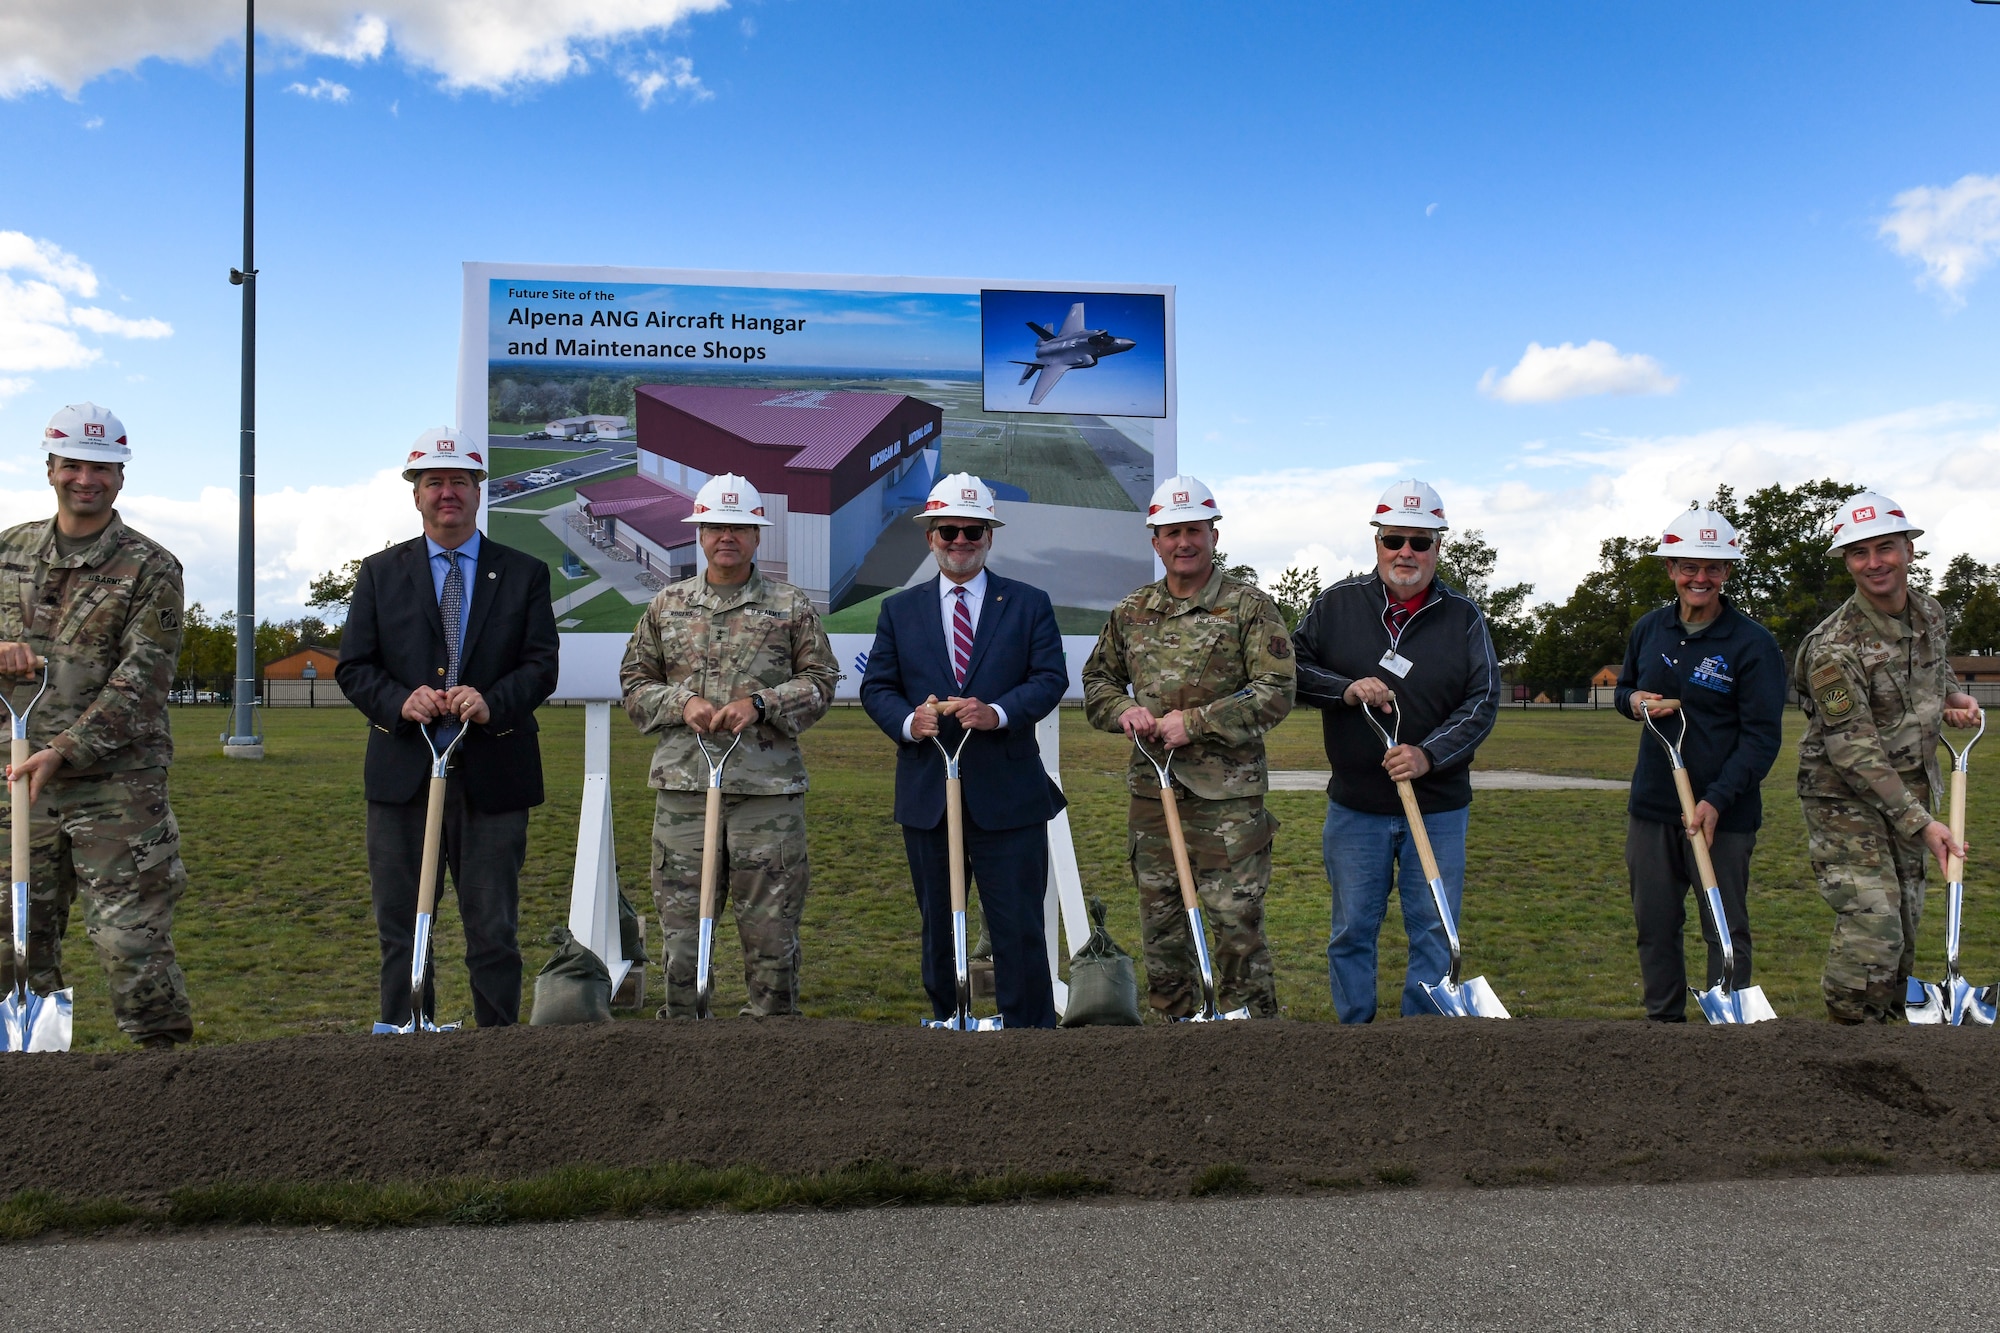 Line of people in military uniforms and business suits, all wearing hard hats and holding shovels in dirt.